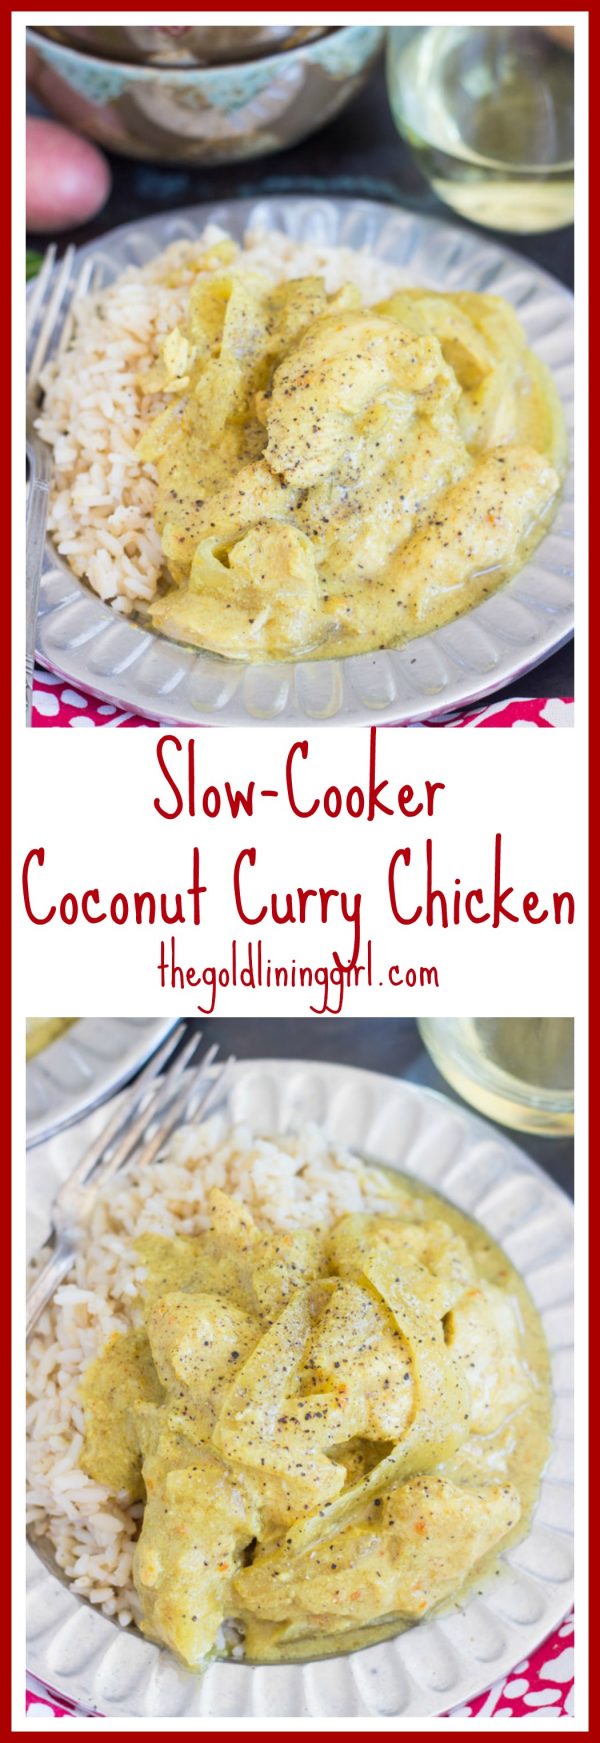 Slow-Cooker Coconut Curry Chicken